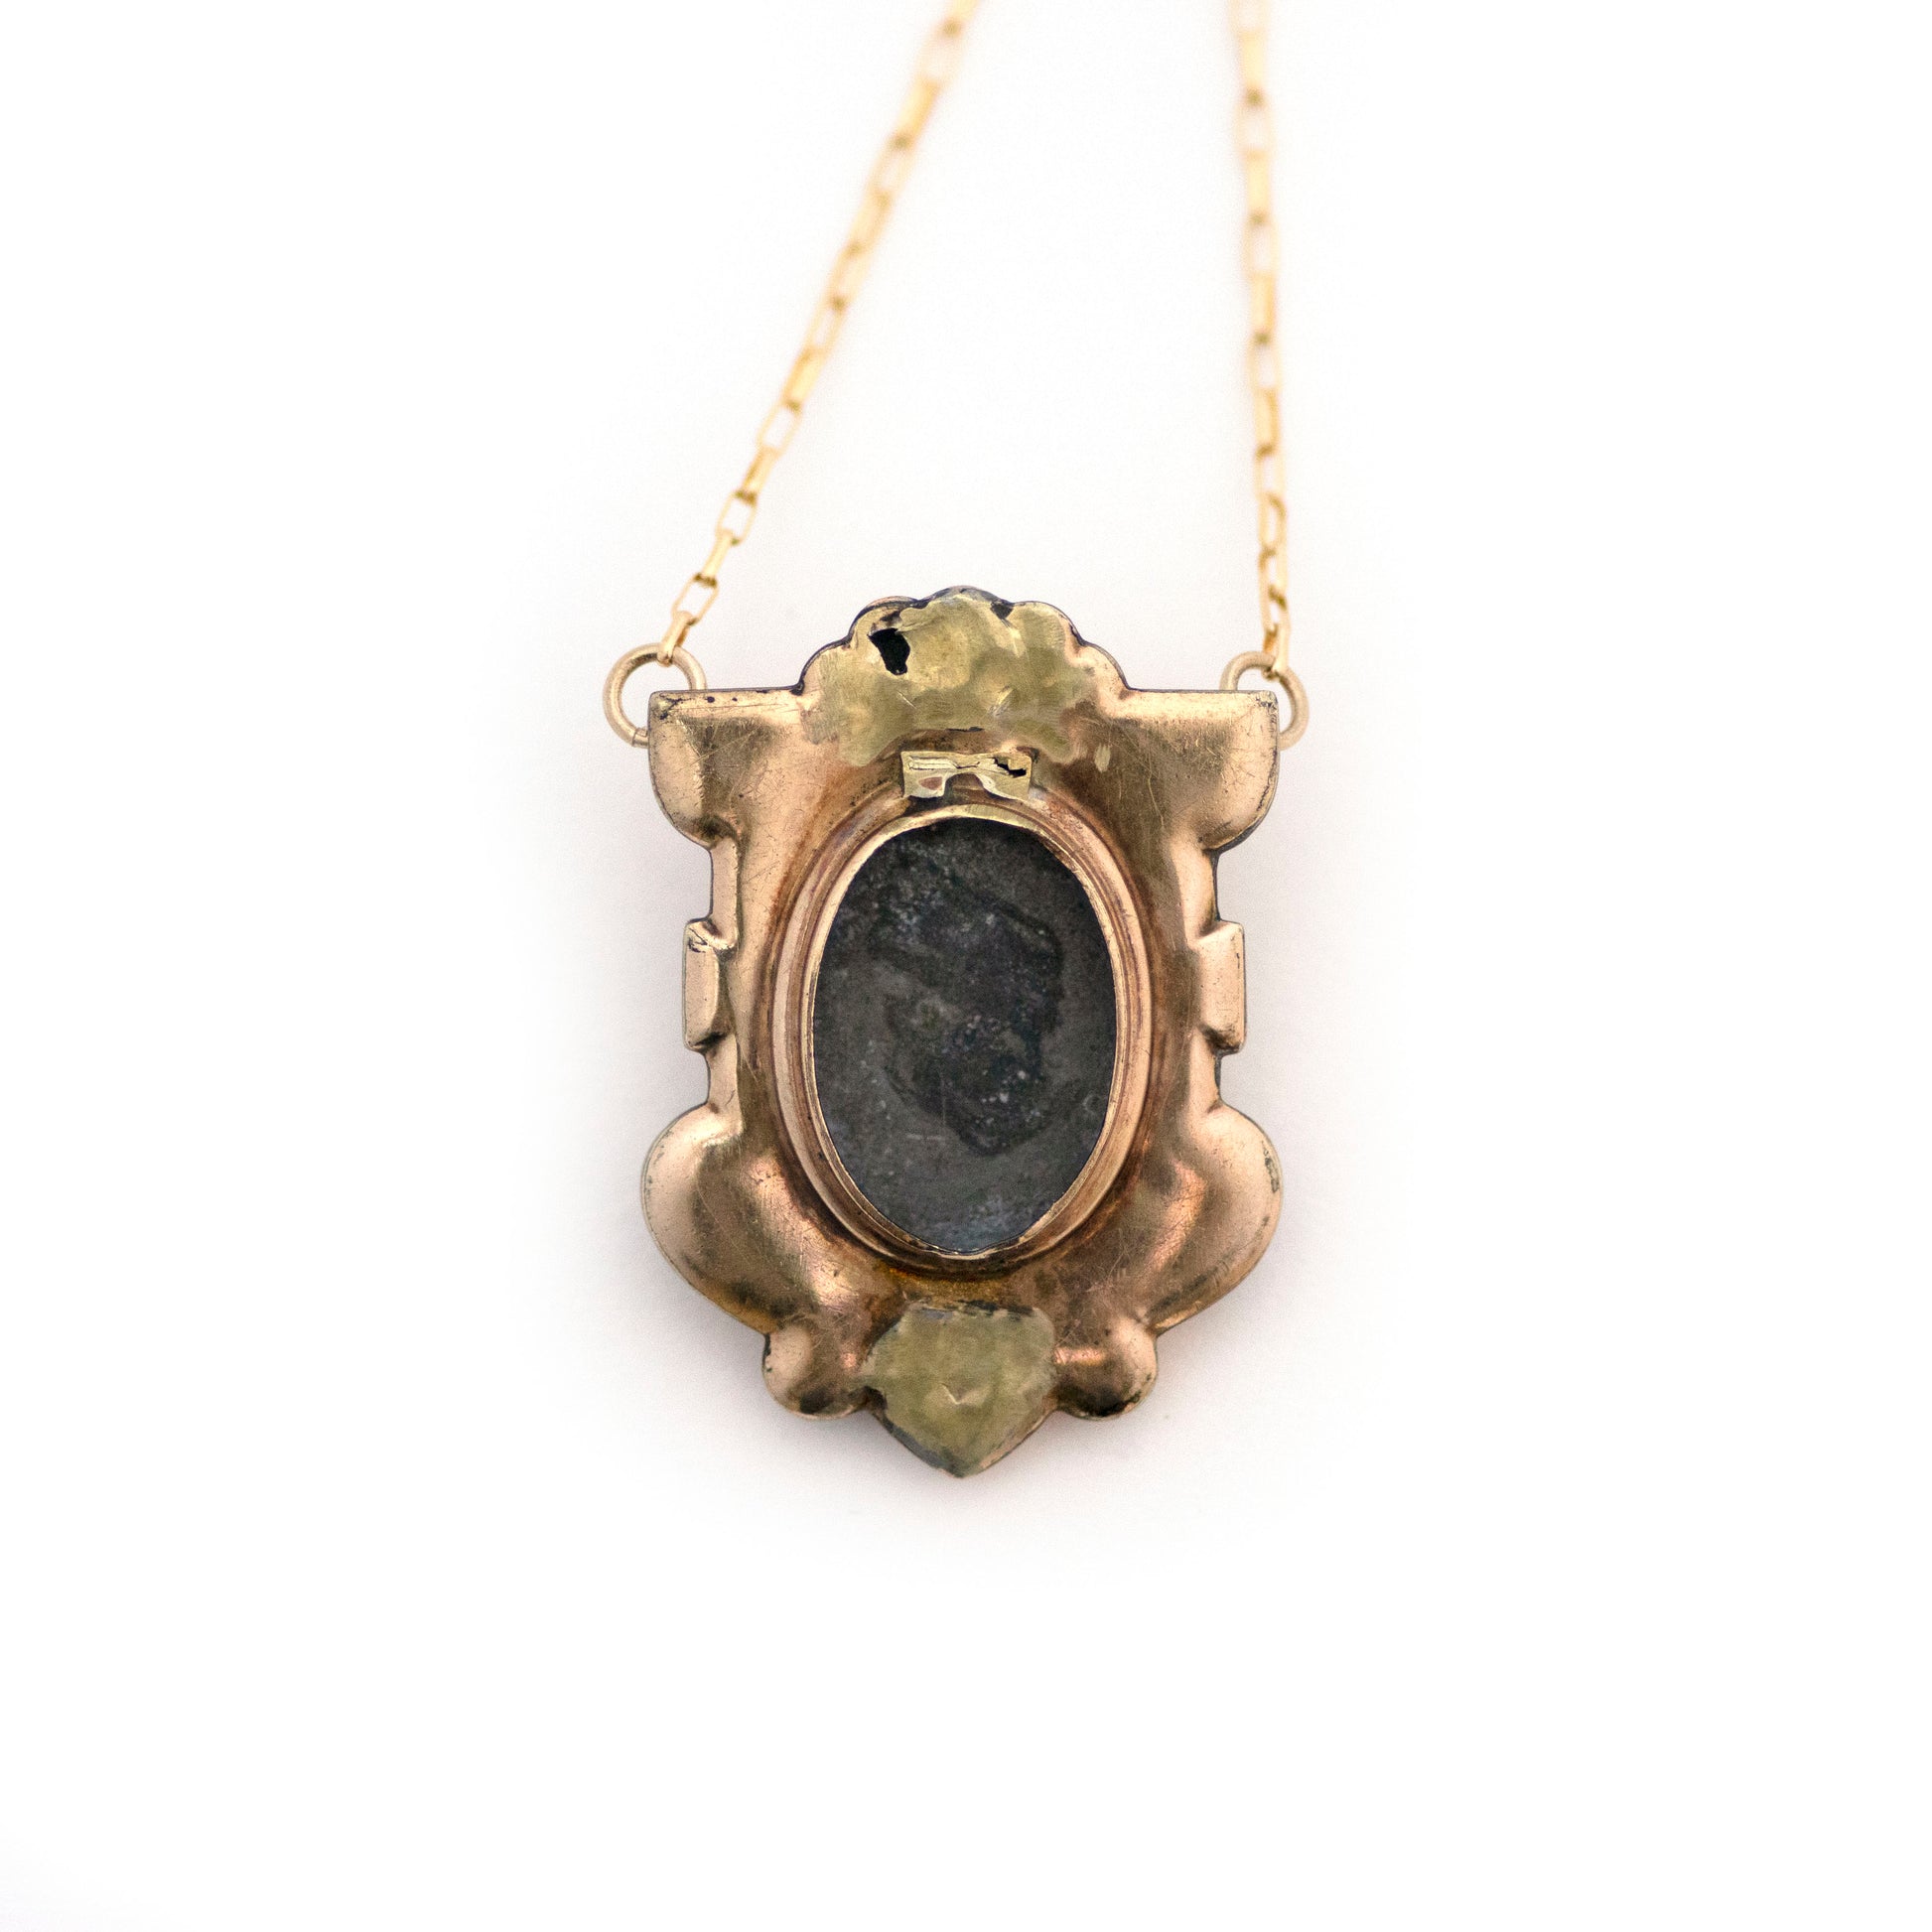 The back of Antique Victorian Blue Paste Shield Necklace shows a hidden locket on the back where the glass cover is missing.